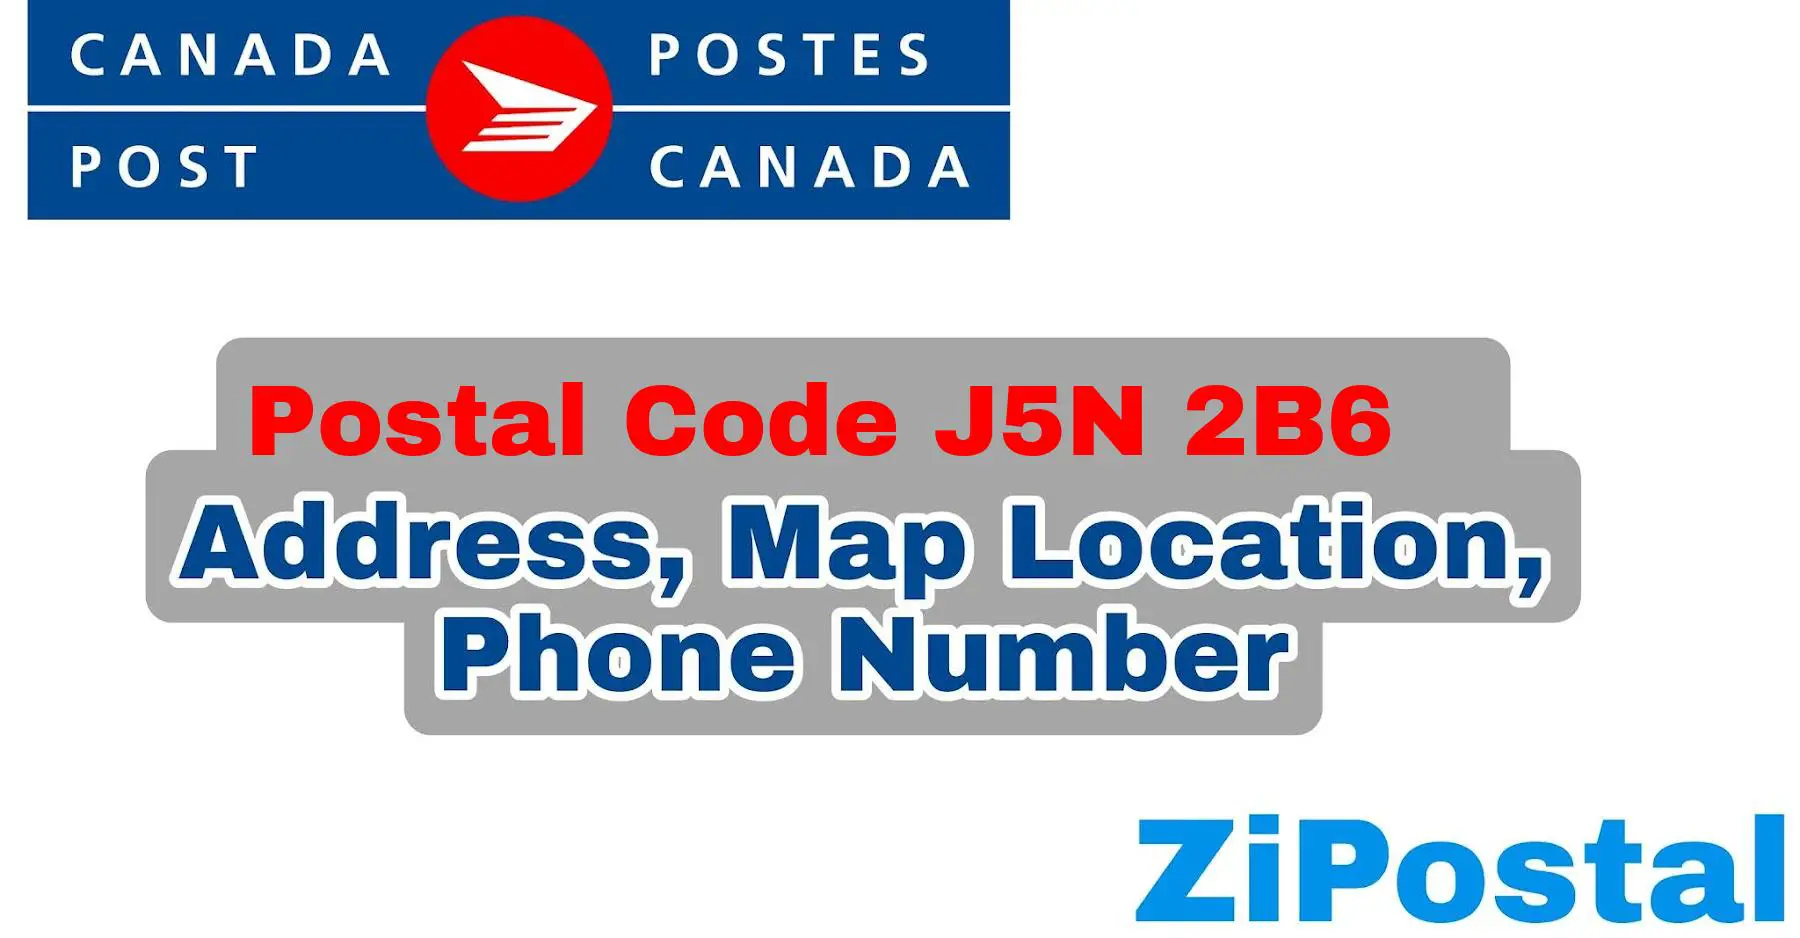 Postal Code J5N 2B6 Address Map Location and Phone Number